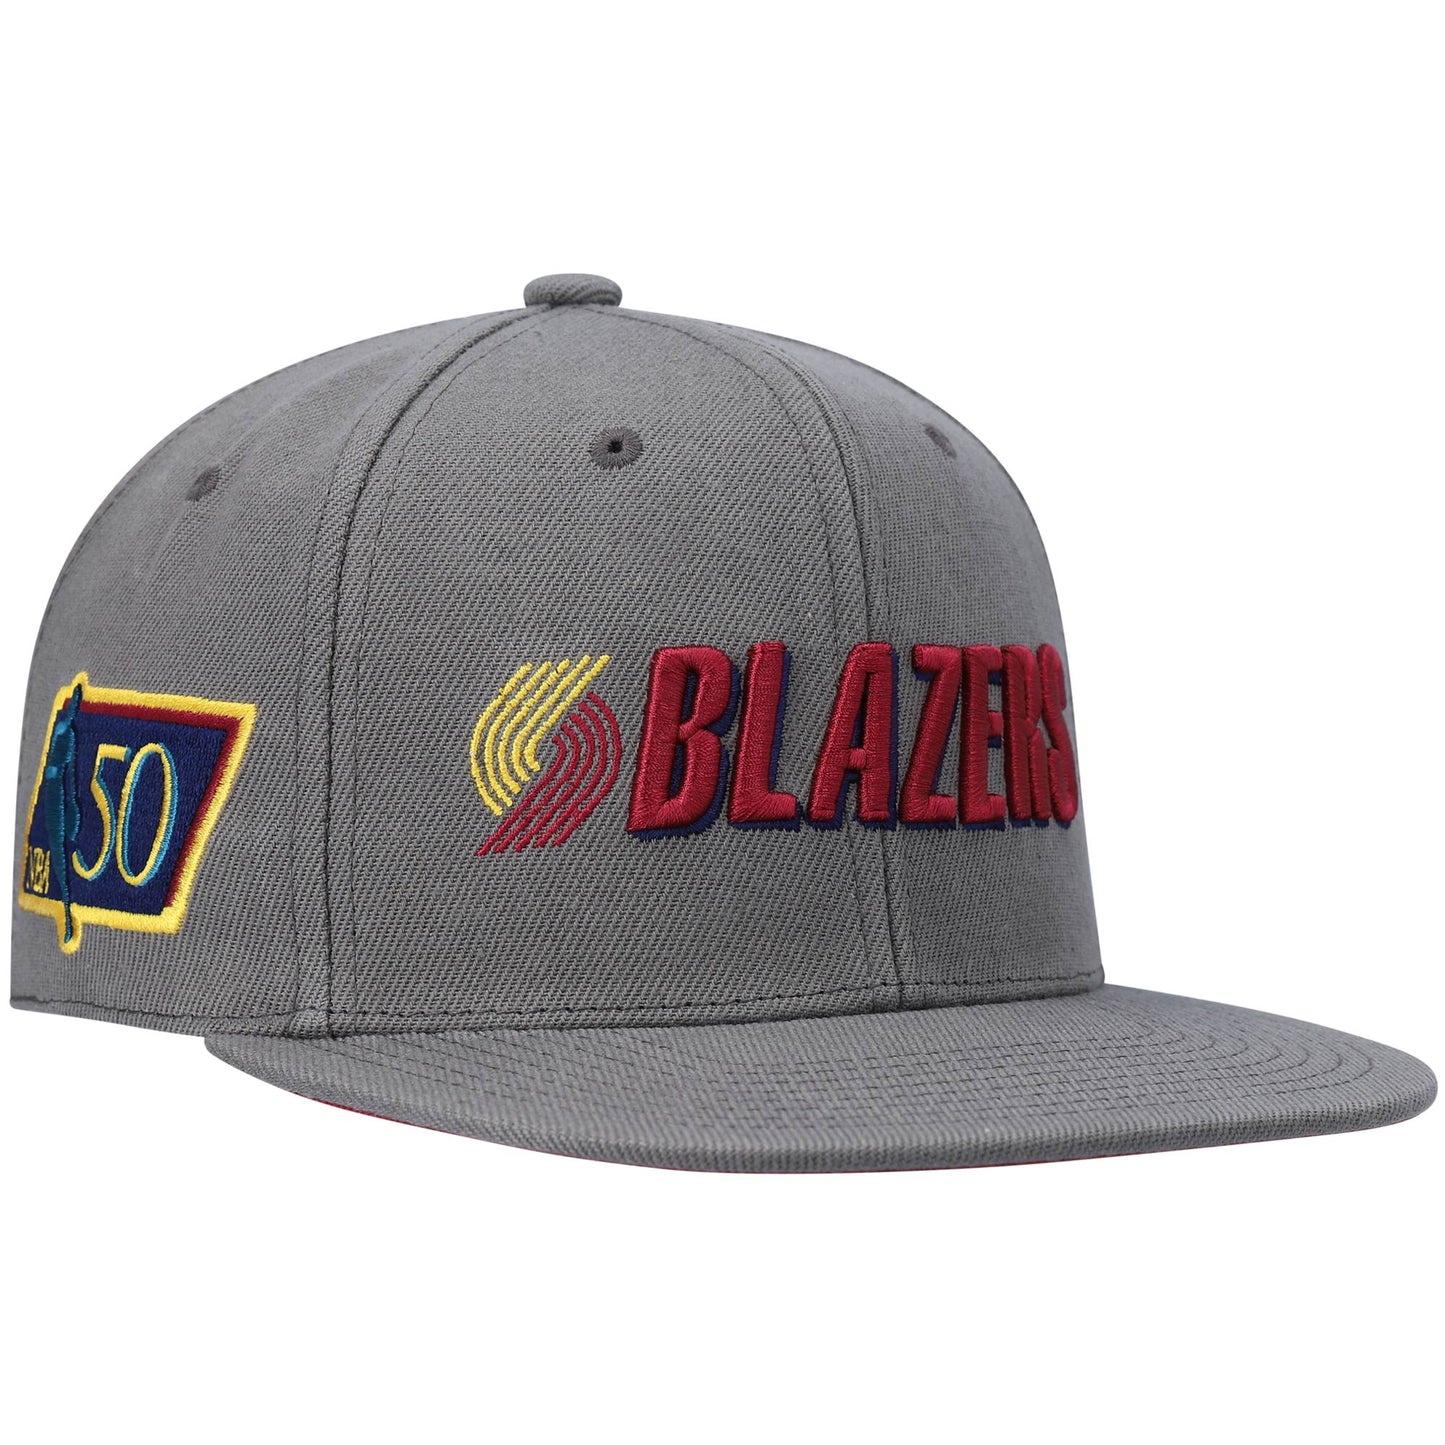 Portland Trail Blazers Mitchell & Ness Hardwood Classics NBA 50th Anniversary Carbon Cabernet Fitted Hat - Charcoal